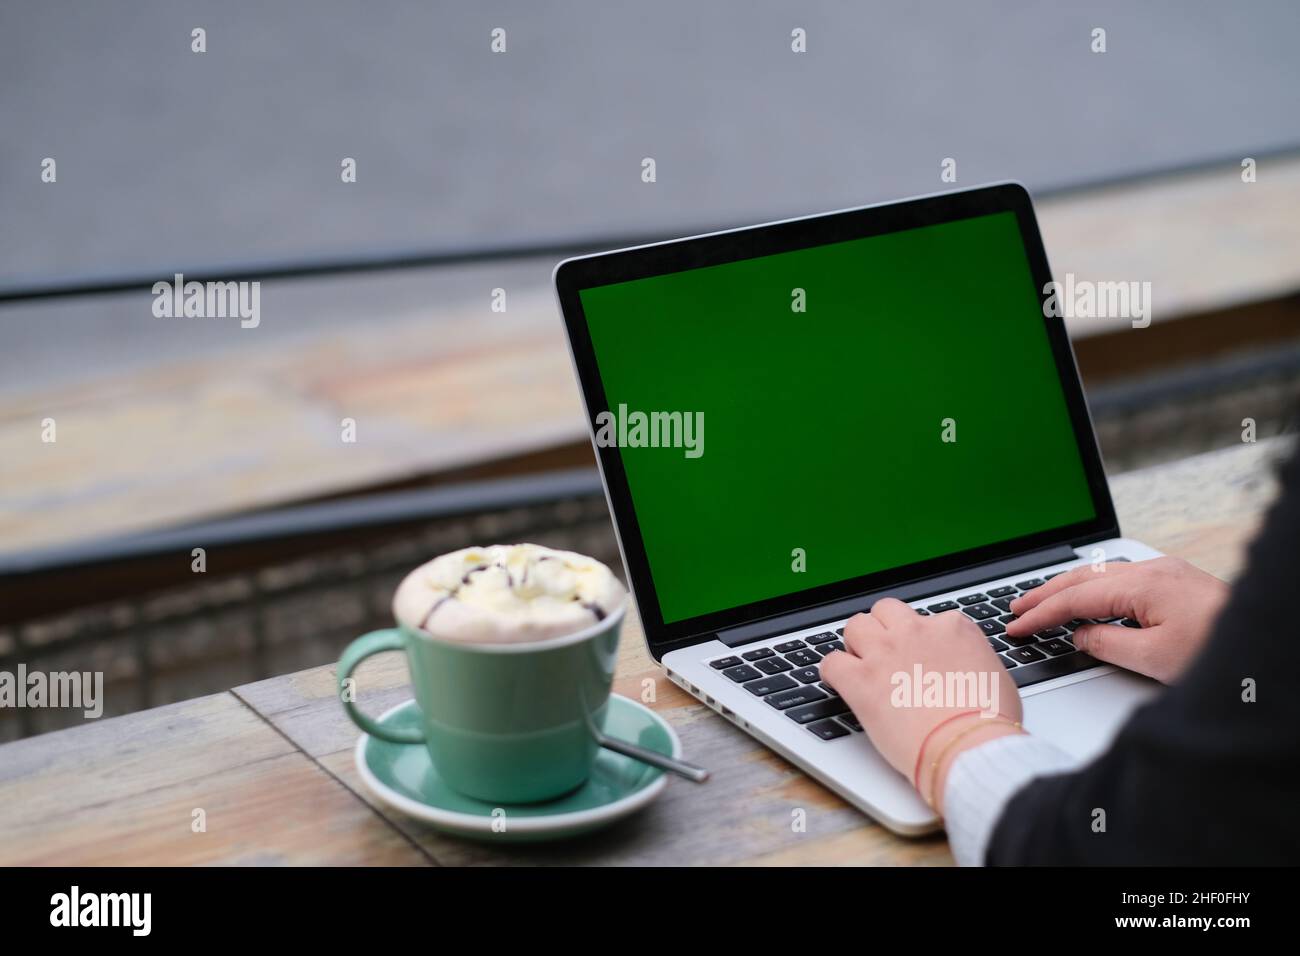 over shoulder view of hand typing on green screen laptop computer. Cup of coffee on cafe table Stock Photo